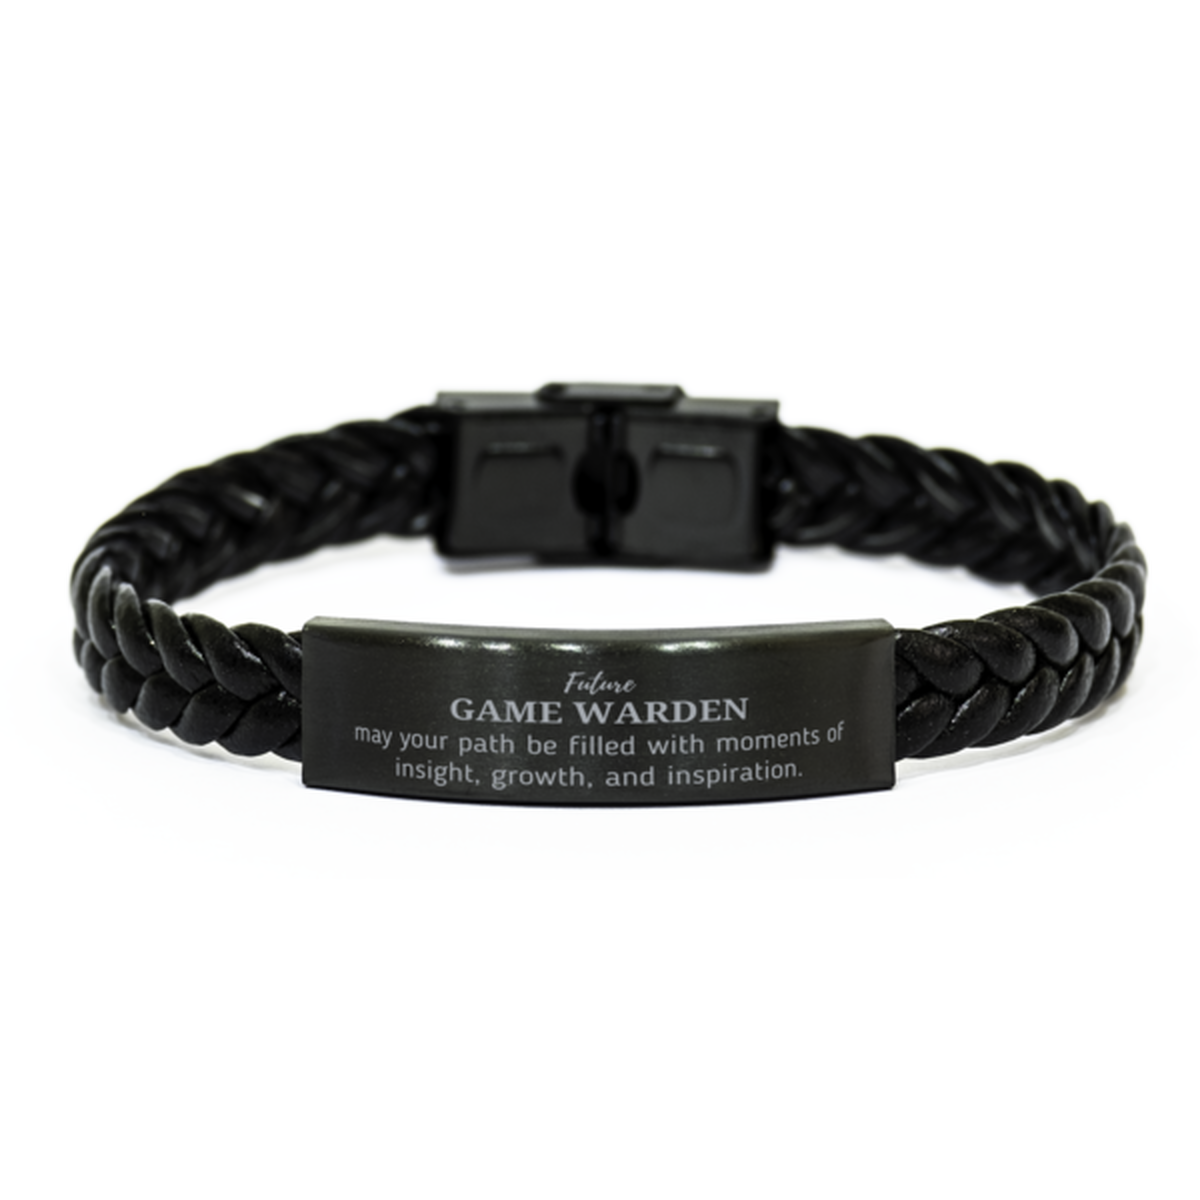 Future Game Warden Gifts, May your path be filled with moments of insight, Graduation Gifts for New Game Warden, Christmas Unique Braided Leather Bracelet For Men, Women, Friends